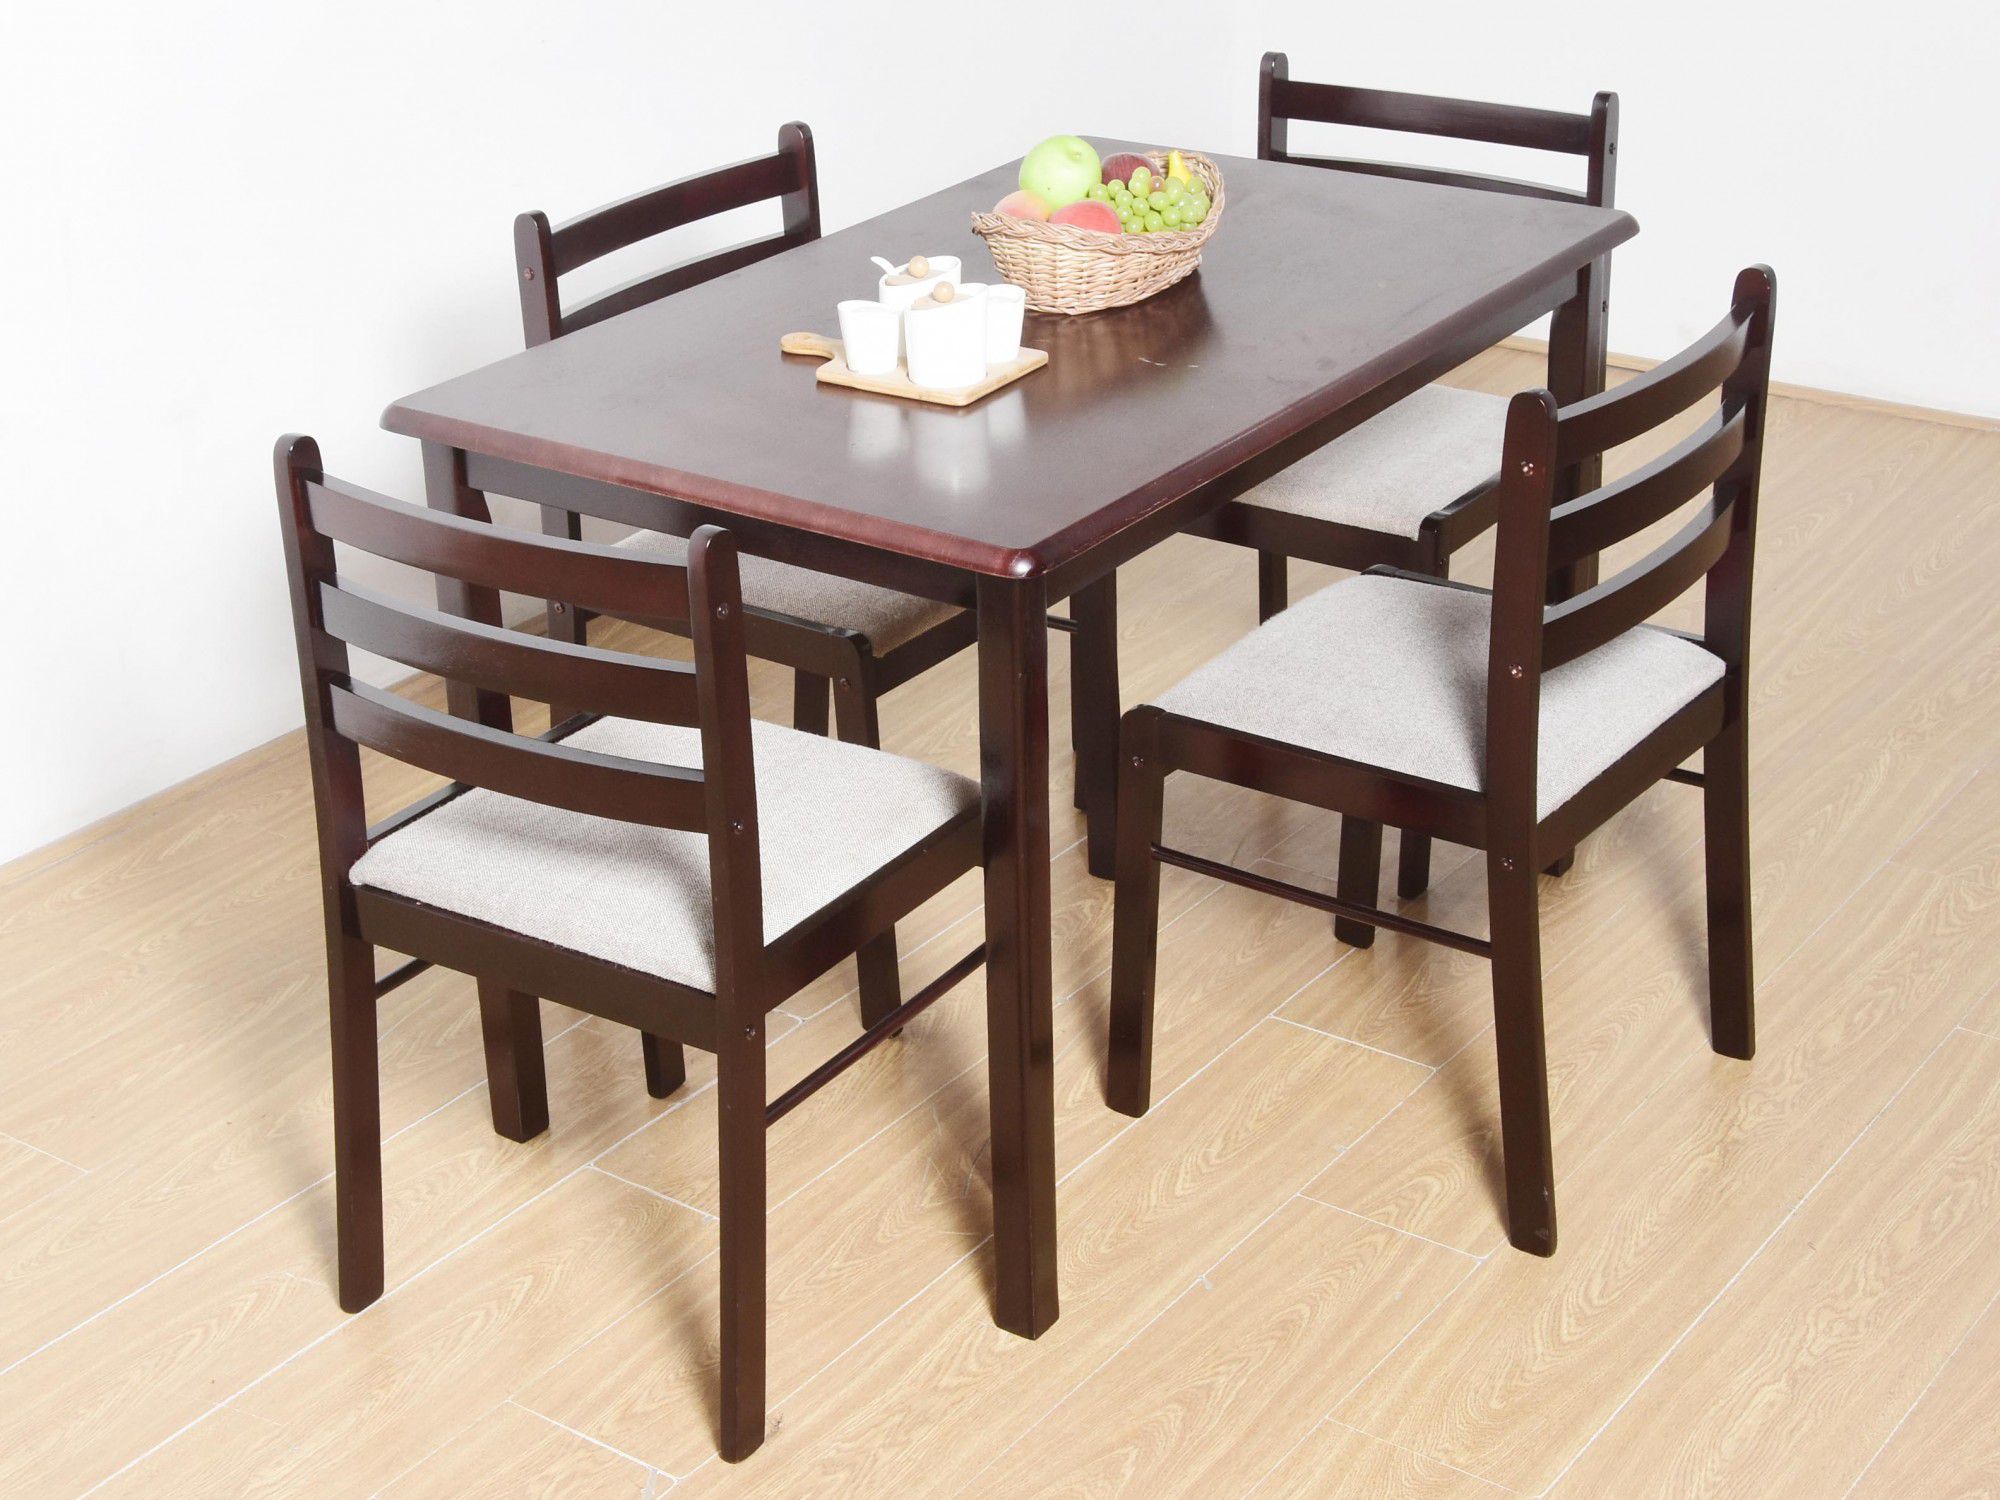 Dining Table With 4 Chairs Price